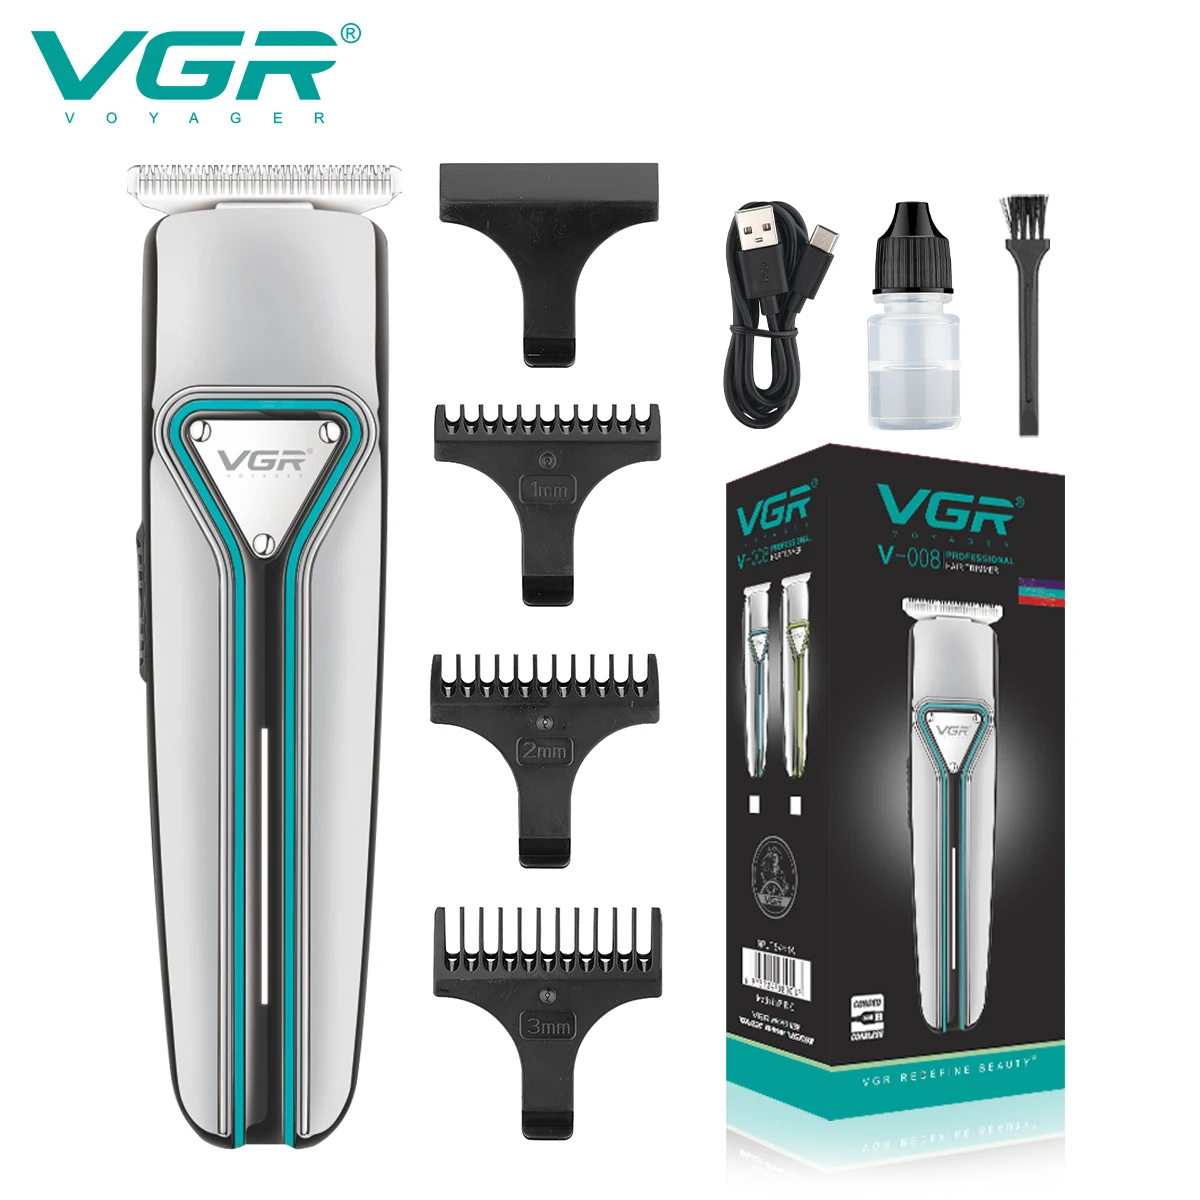 

VGR Hair Trimmer Professional Cordless Electric Beard Shaver Portable Rechargeable Haircut T-Blade Shaving Machine Barber V-008